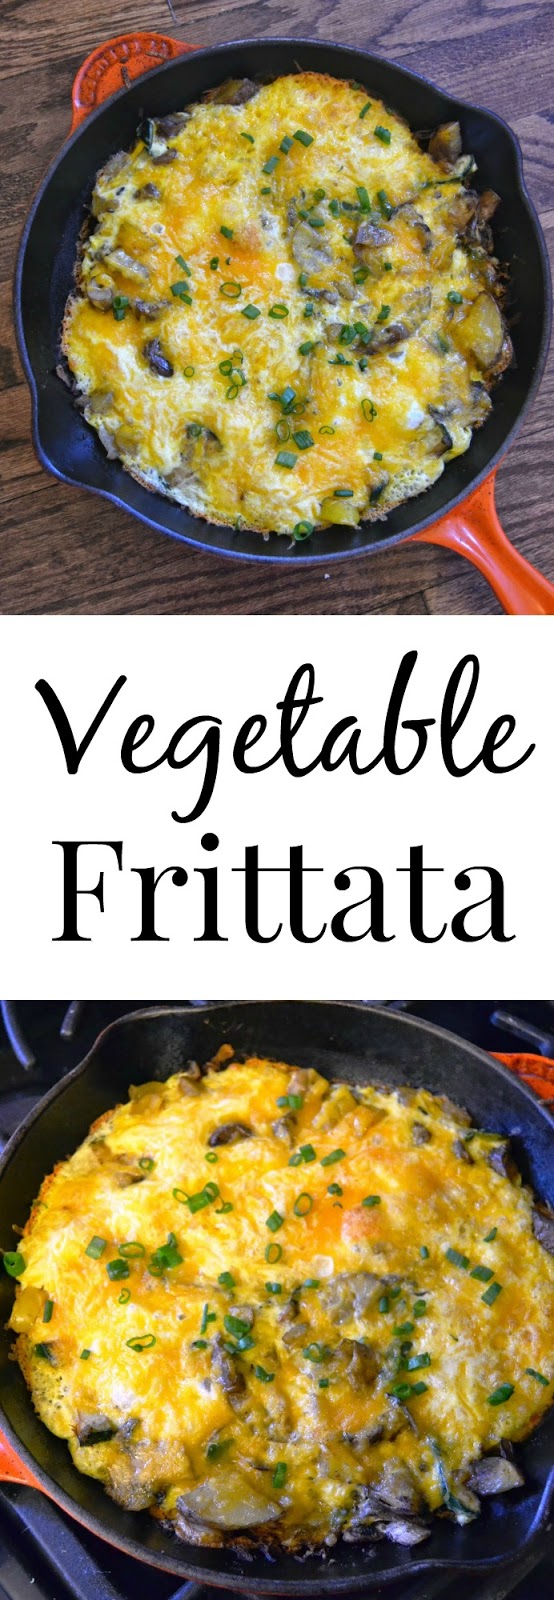 This Vegetable Frittata is so simple to make and customizable based on your preferences and what you have on hand! www.nutritionistreviews.com